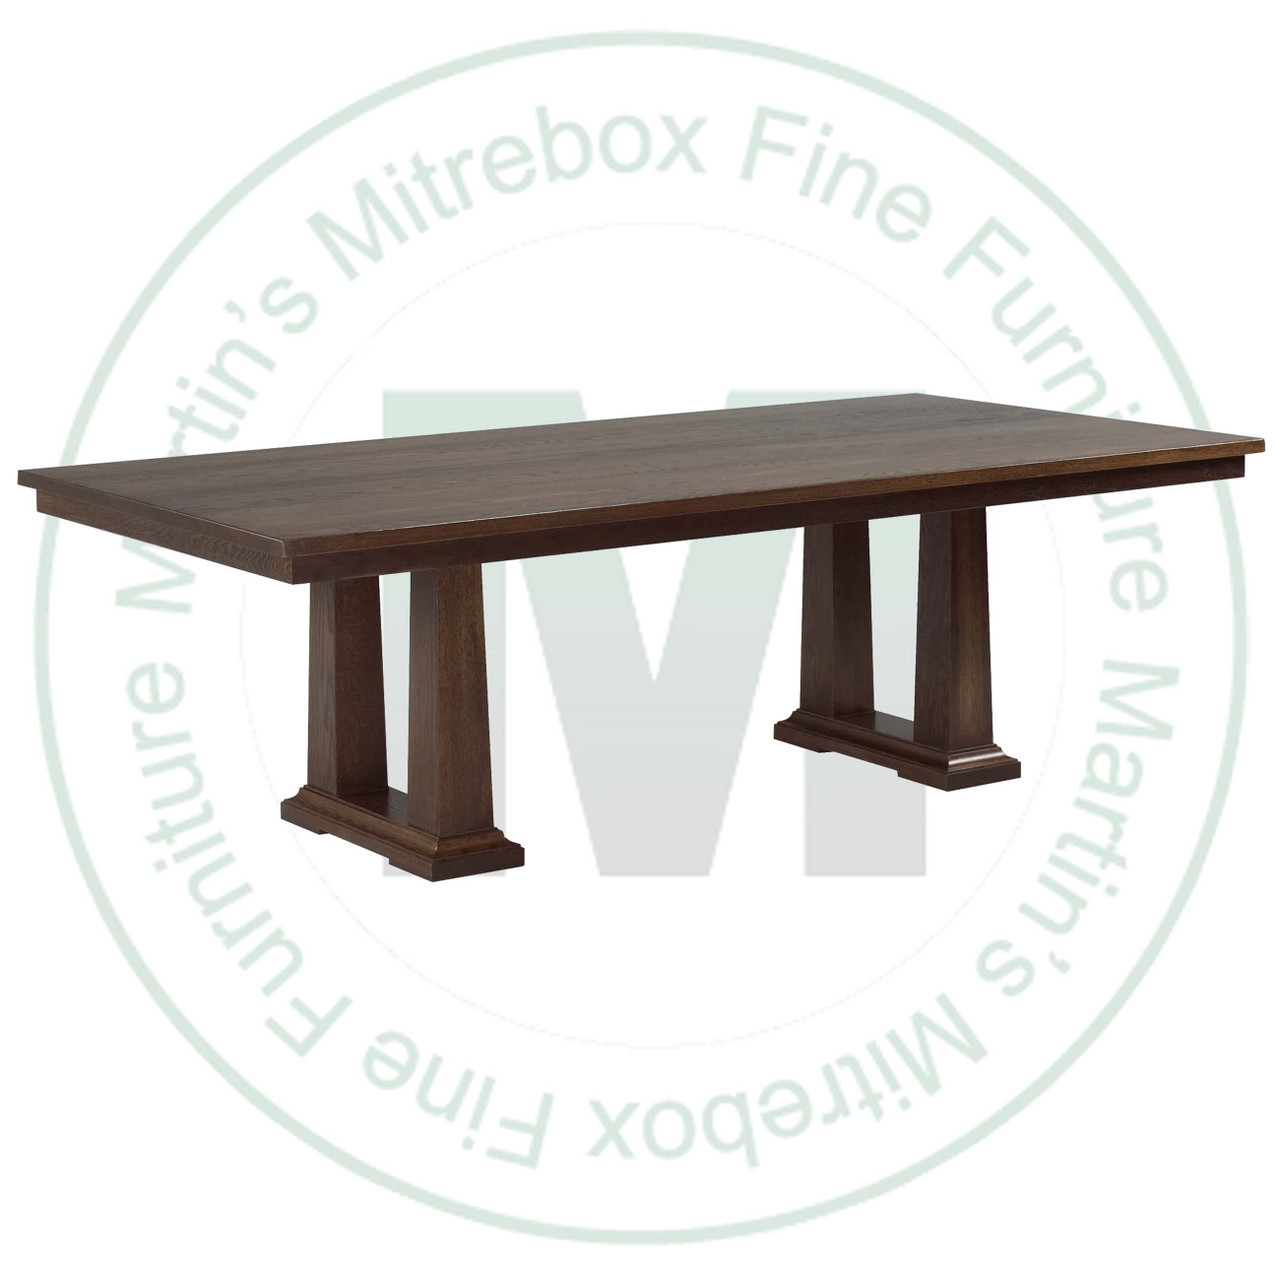 Oak Acropolis Extension Double Pedestal Table 48''D x 96''W x 30''H With 3 - 12'' Leaves Table Has 1.75'' Thick Top